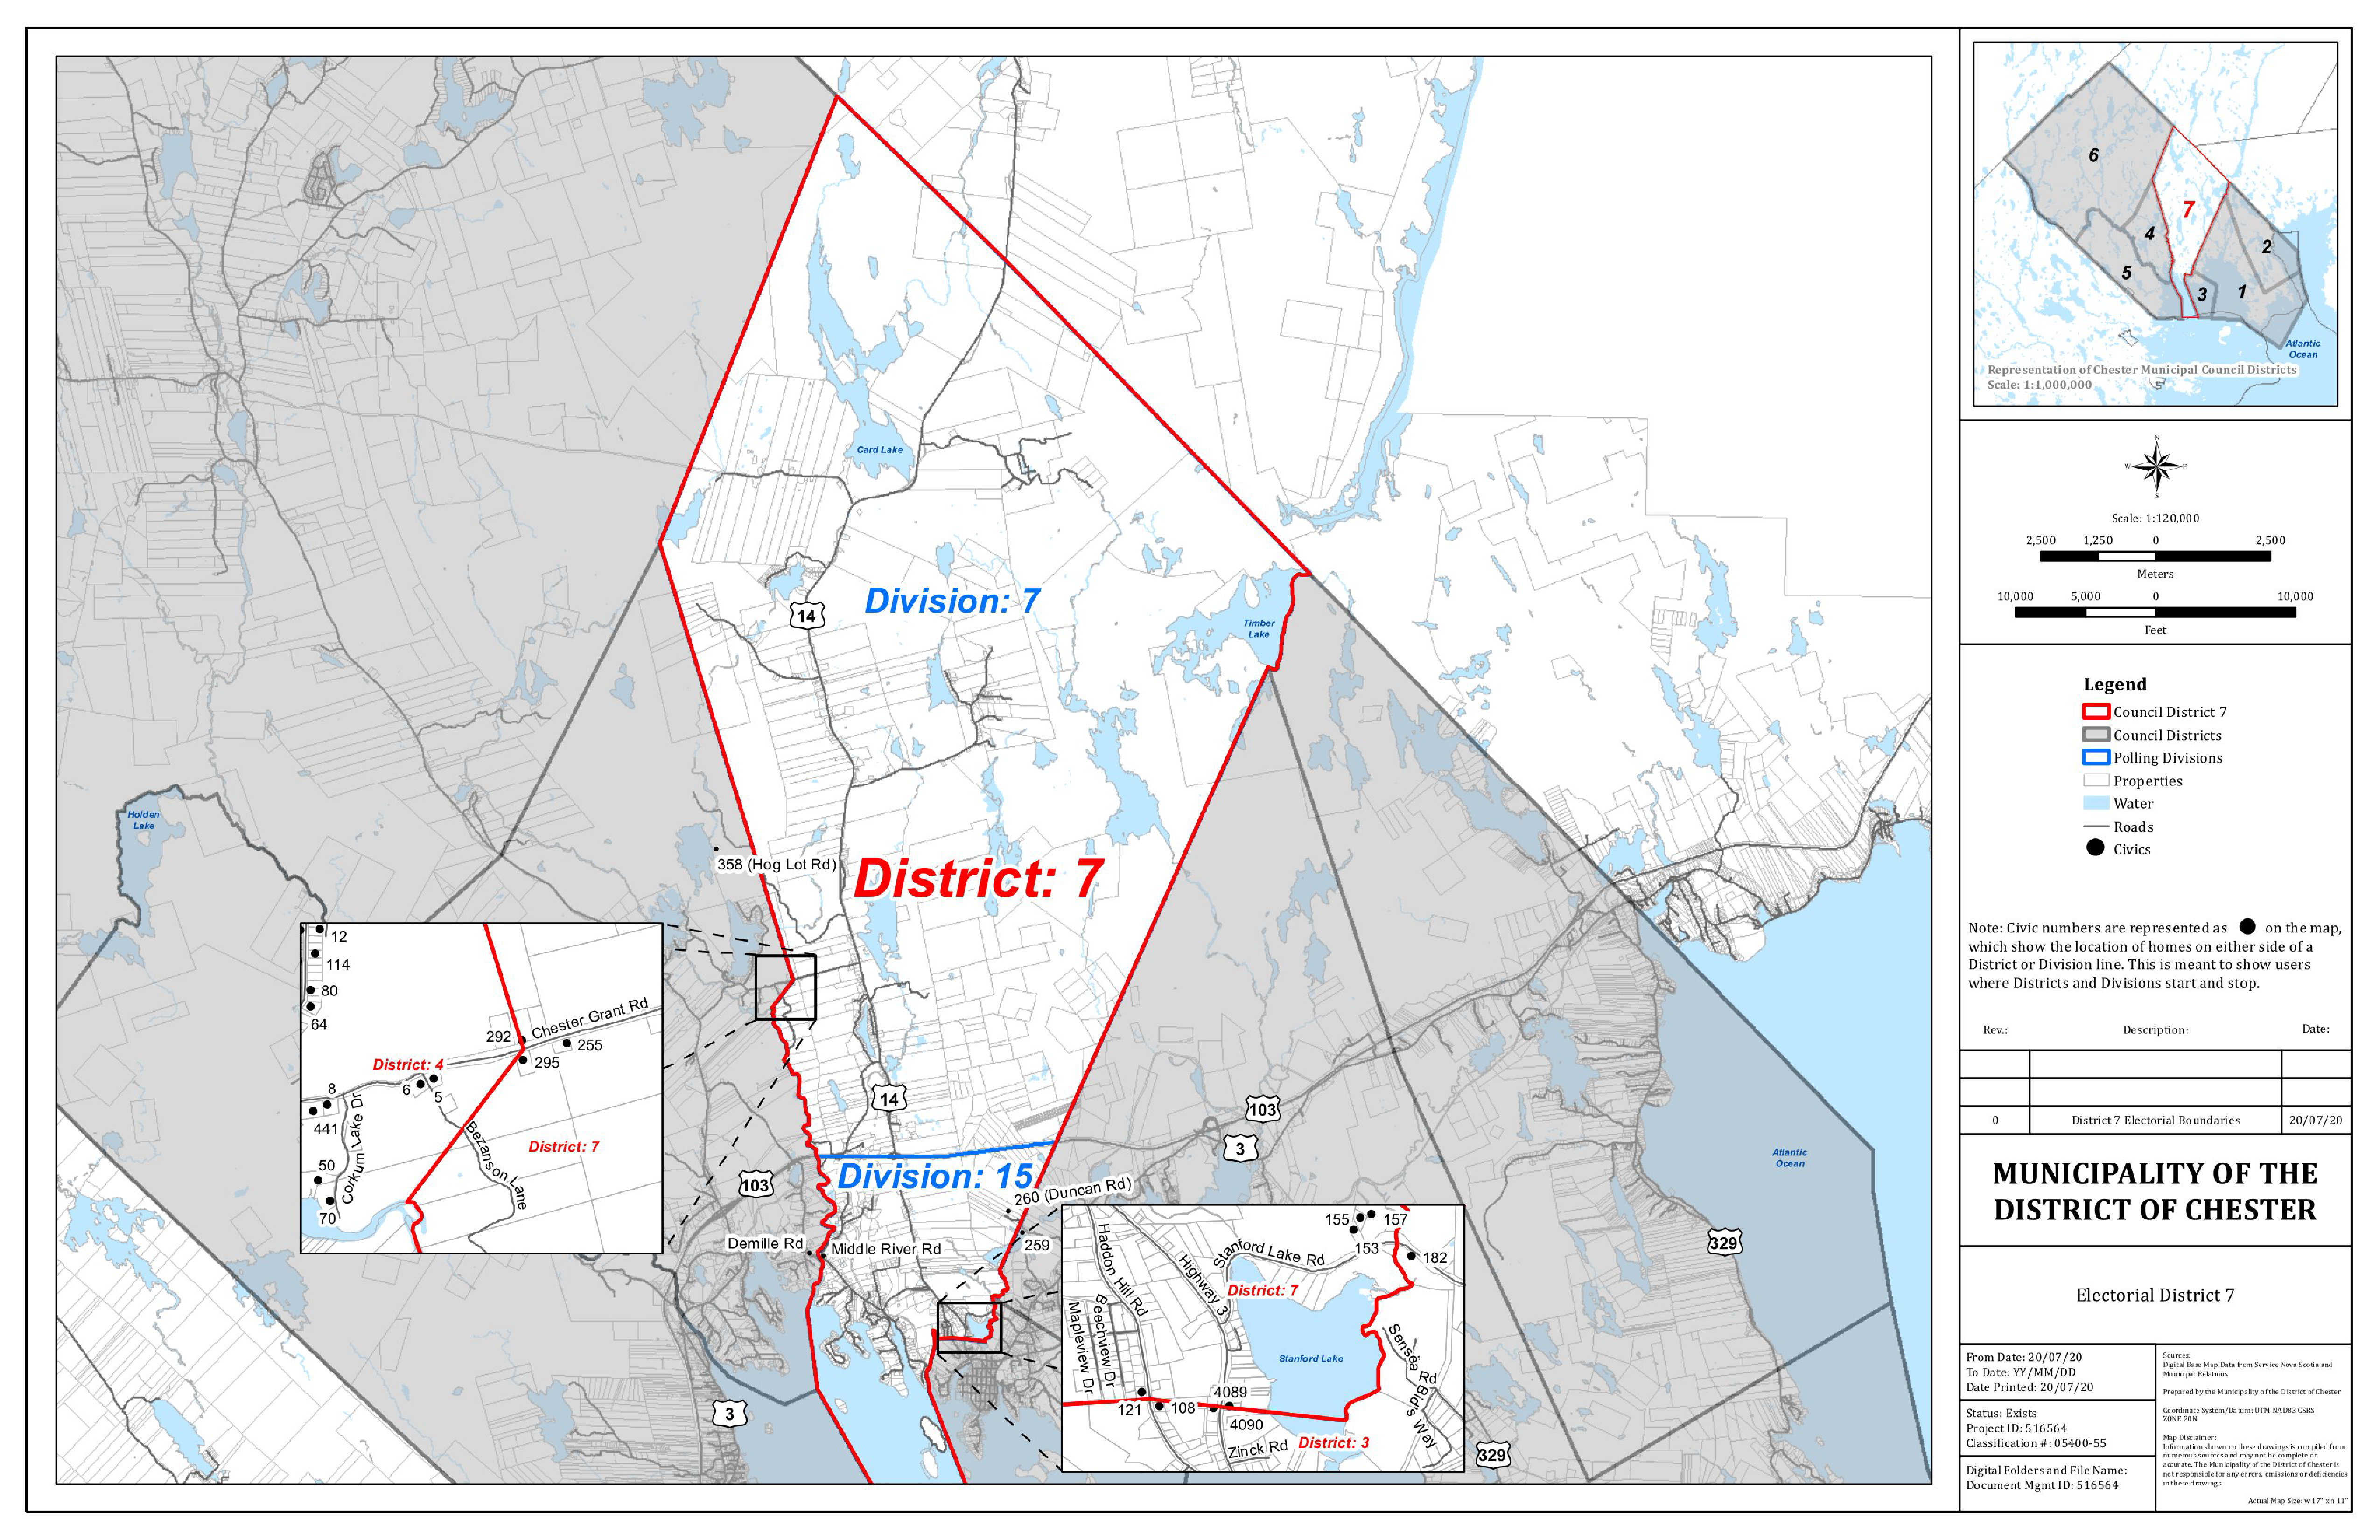 Graphic showing map of Electorial District 7 of the Municipality of the District of Chester